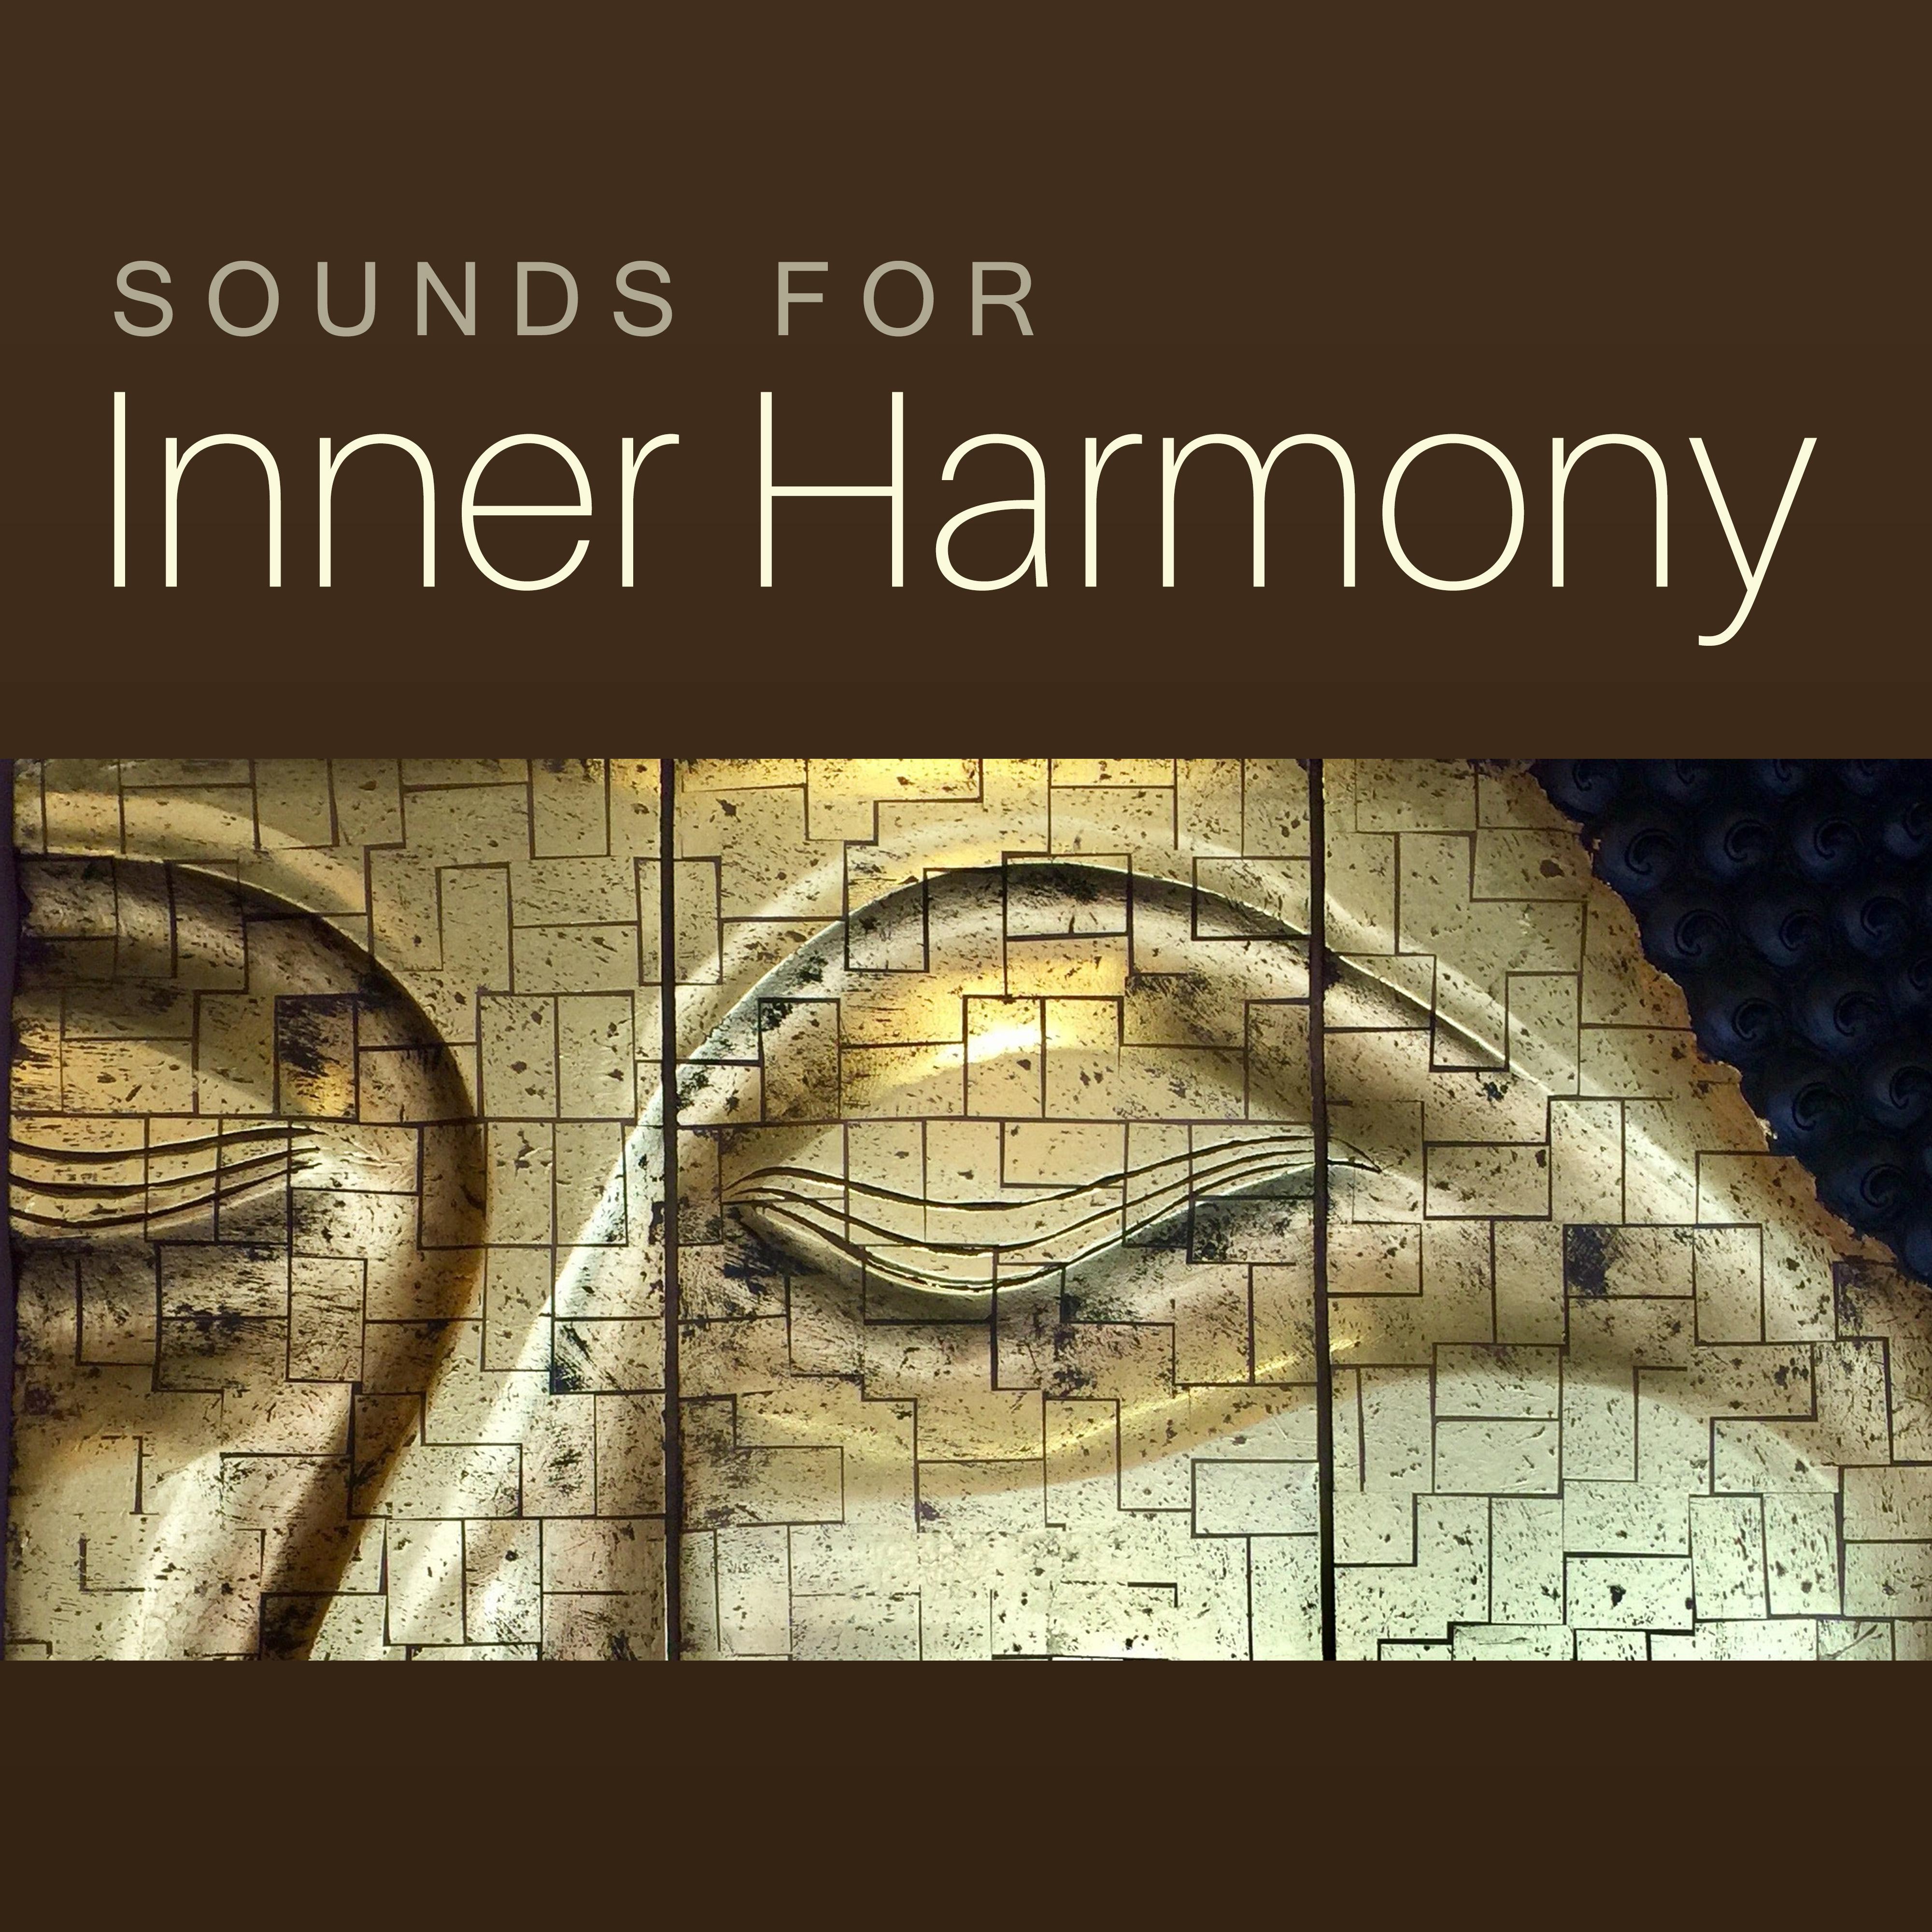 Sounds for Inner Harmony – Relaxing New Age Sounds, Peaceful Waves, Buddha Lounge, Meditation & Relaxation